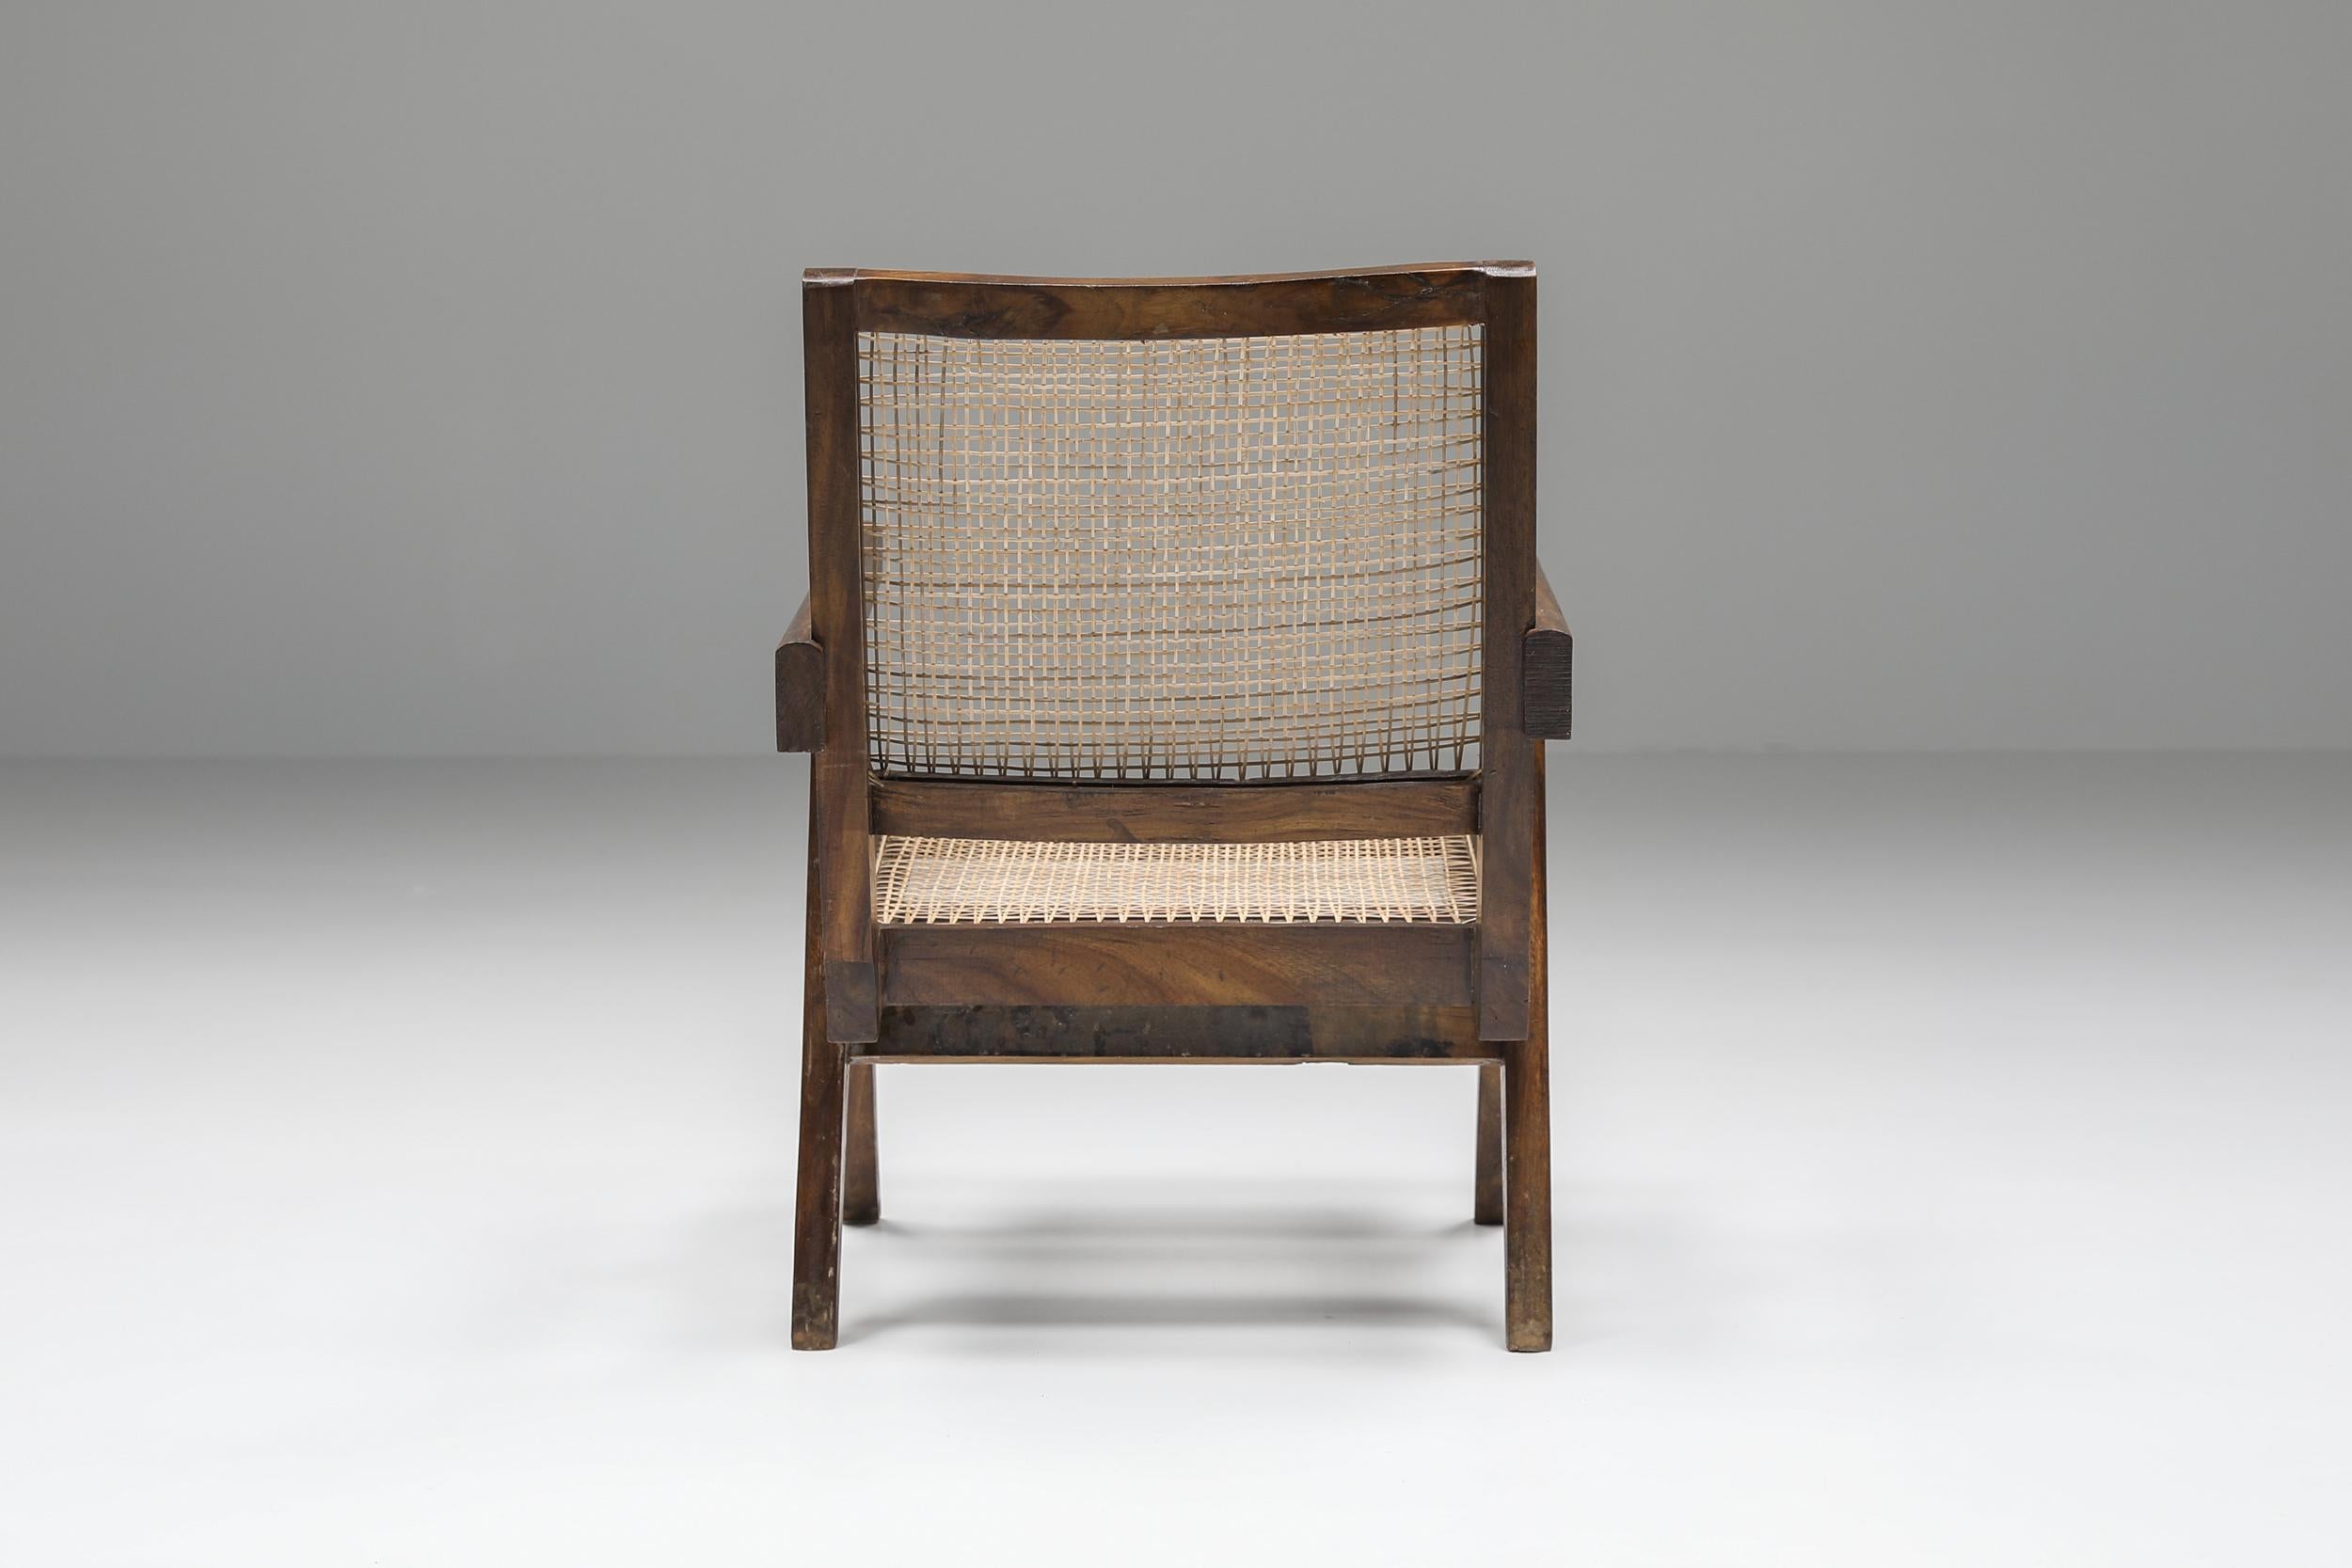 Indian Jeanneret Easy Chairs 1965-1967, Mid-Century Modern Chandigarh, Corbusier